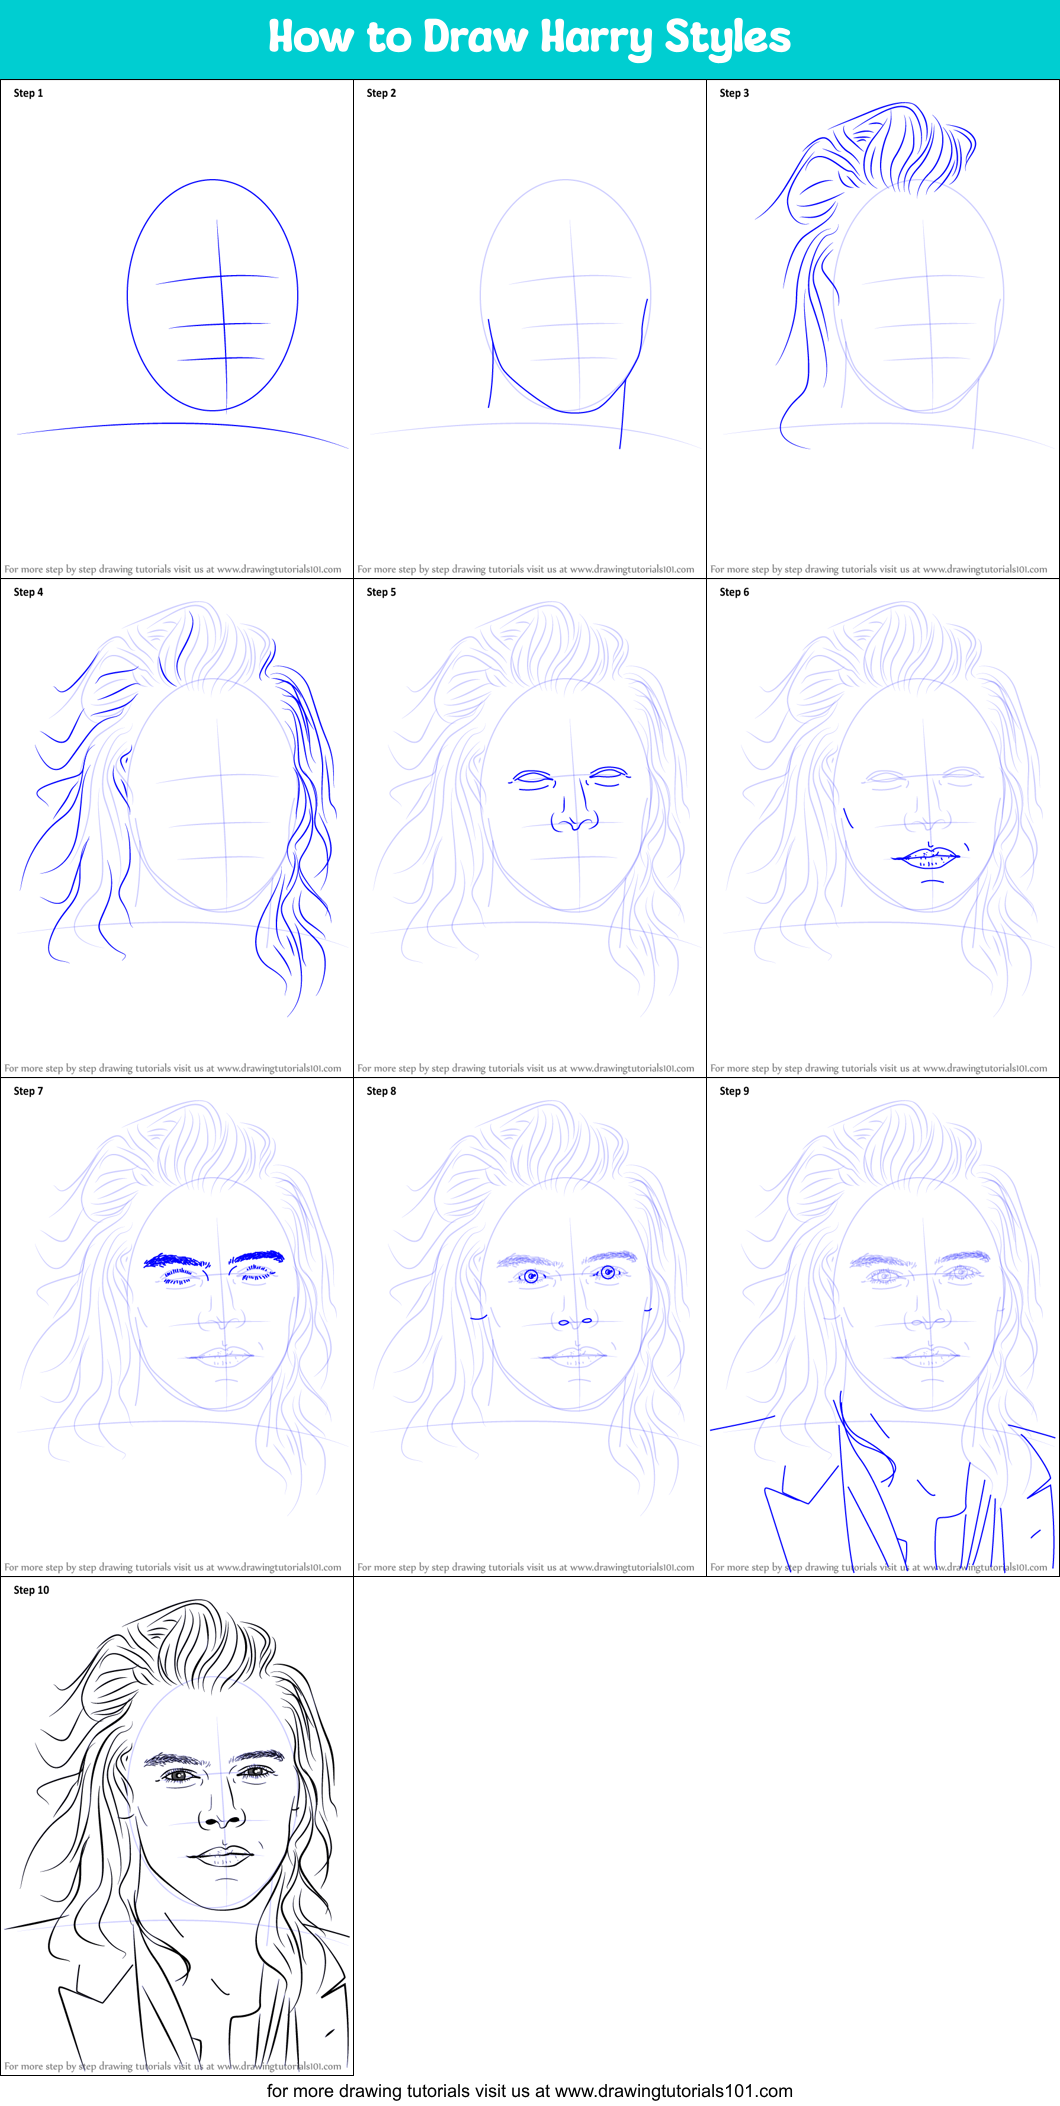 How to Draw Harry Styles printable step by step drawing sheet